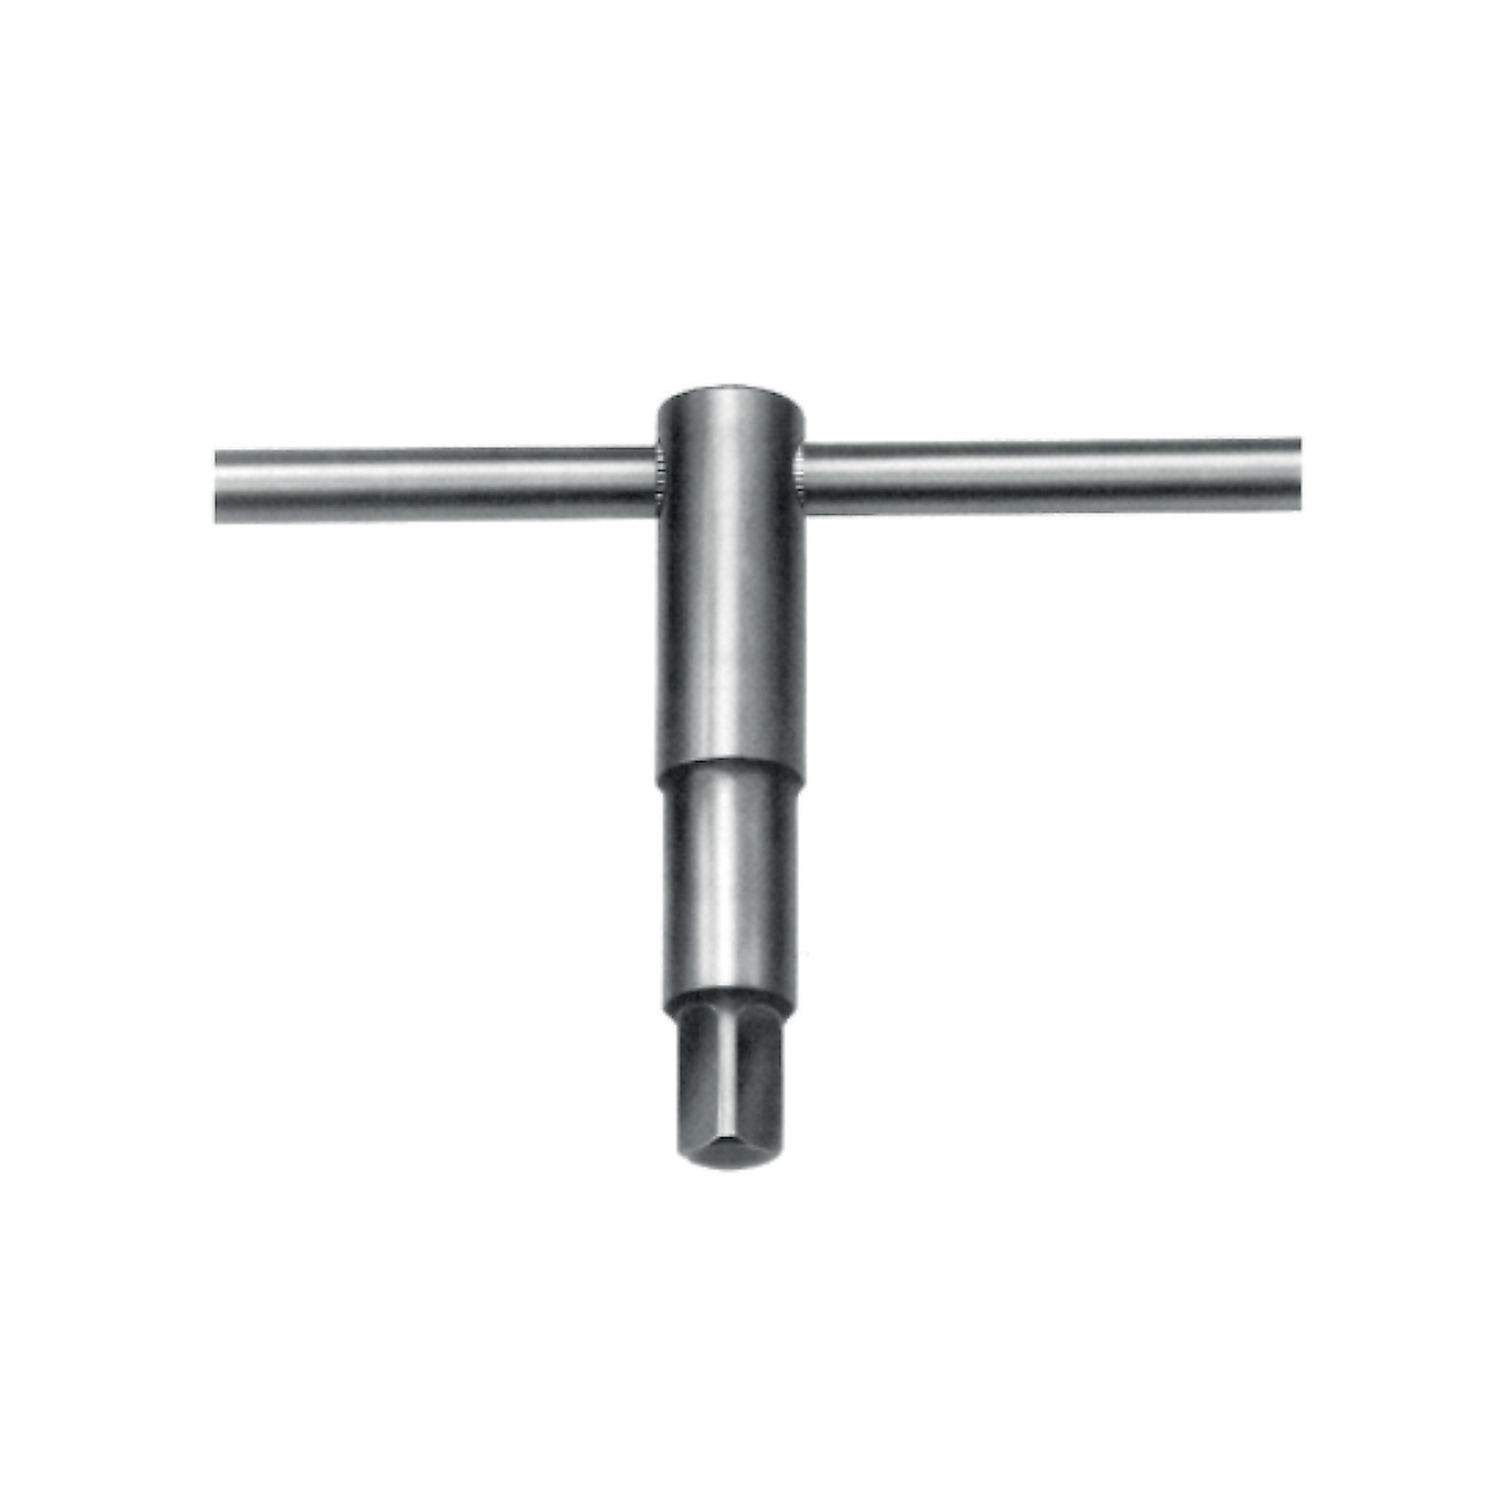 Product 92050, Square Drive Socket T-Wrench male / 